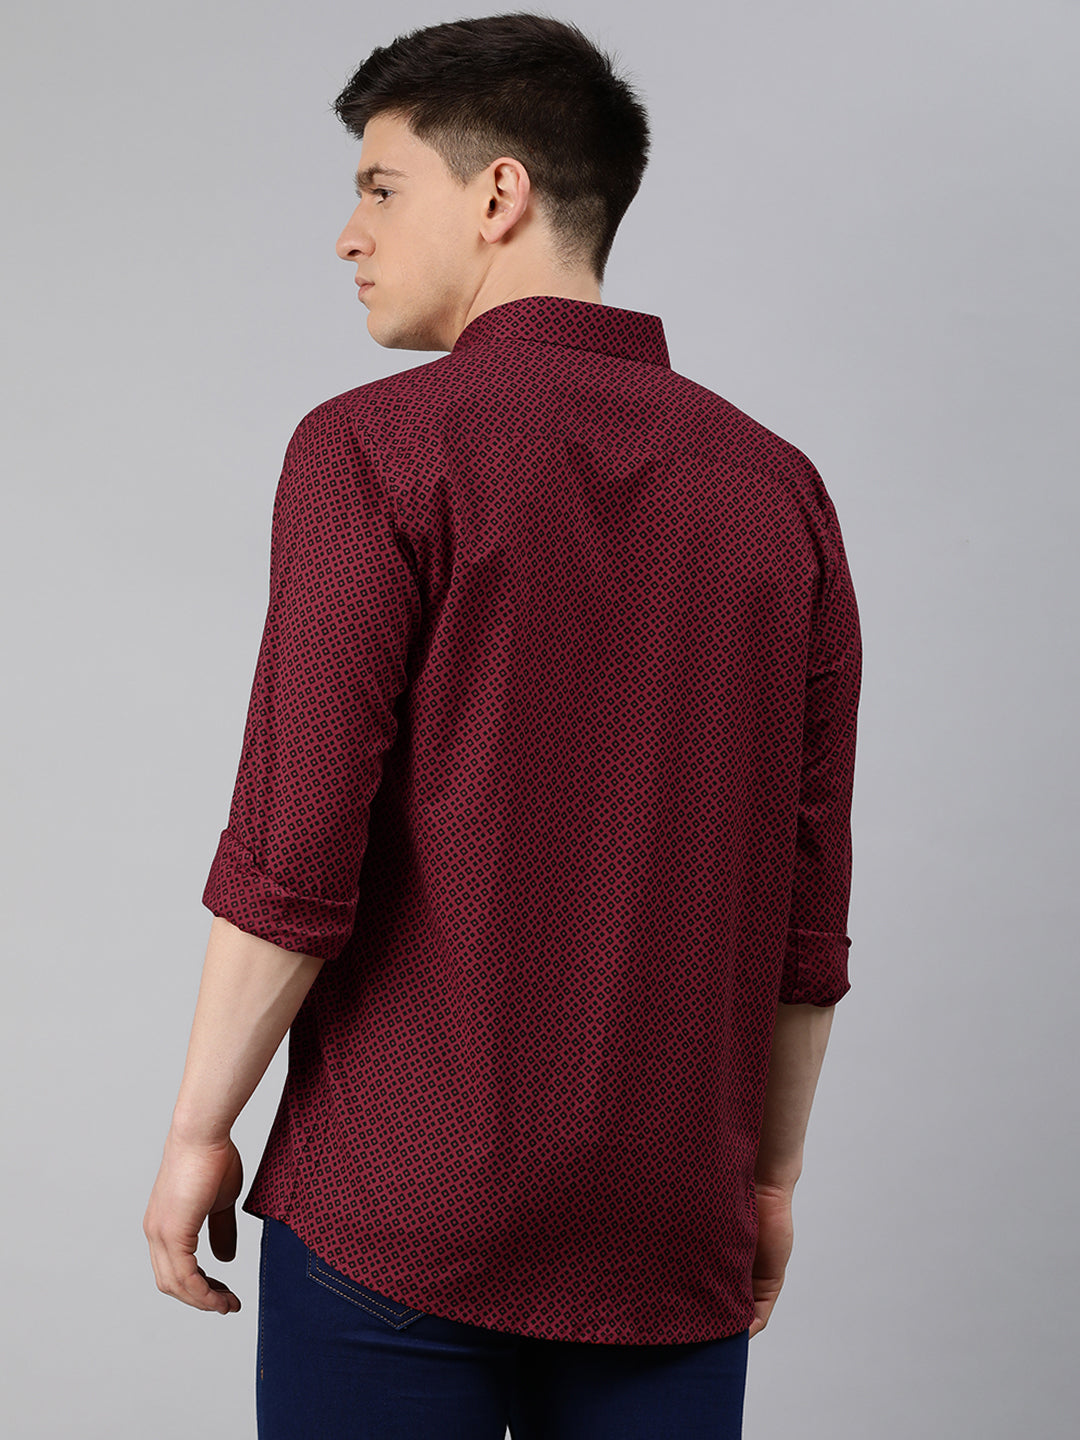 Maroon Cotton Full Sleeves Shirts For Men